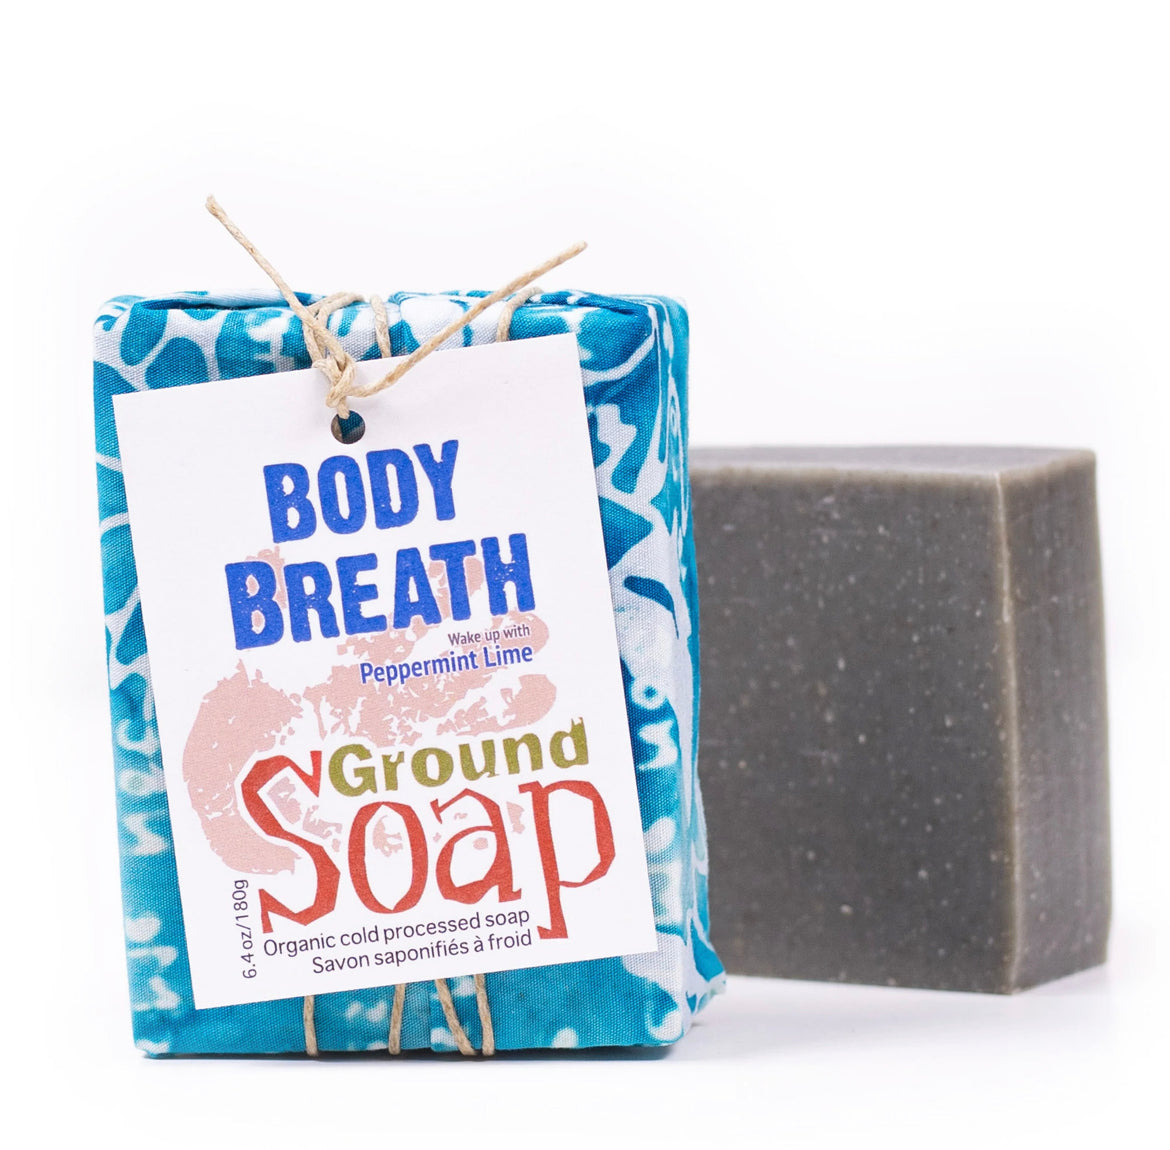 Body Breath - Wake up with Peppermint! - Extra Large Organic Bar Soap